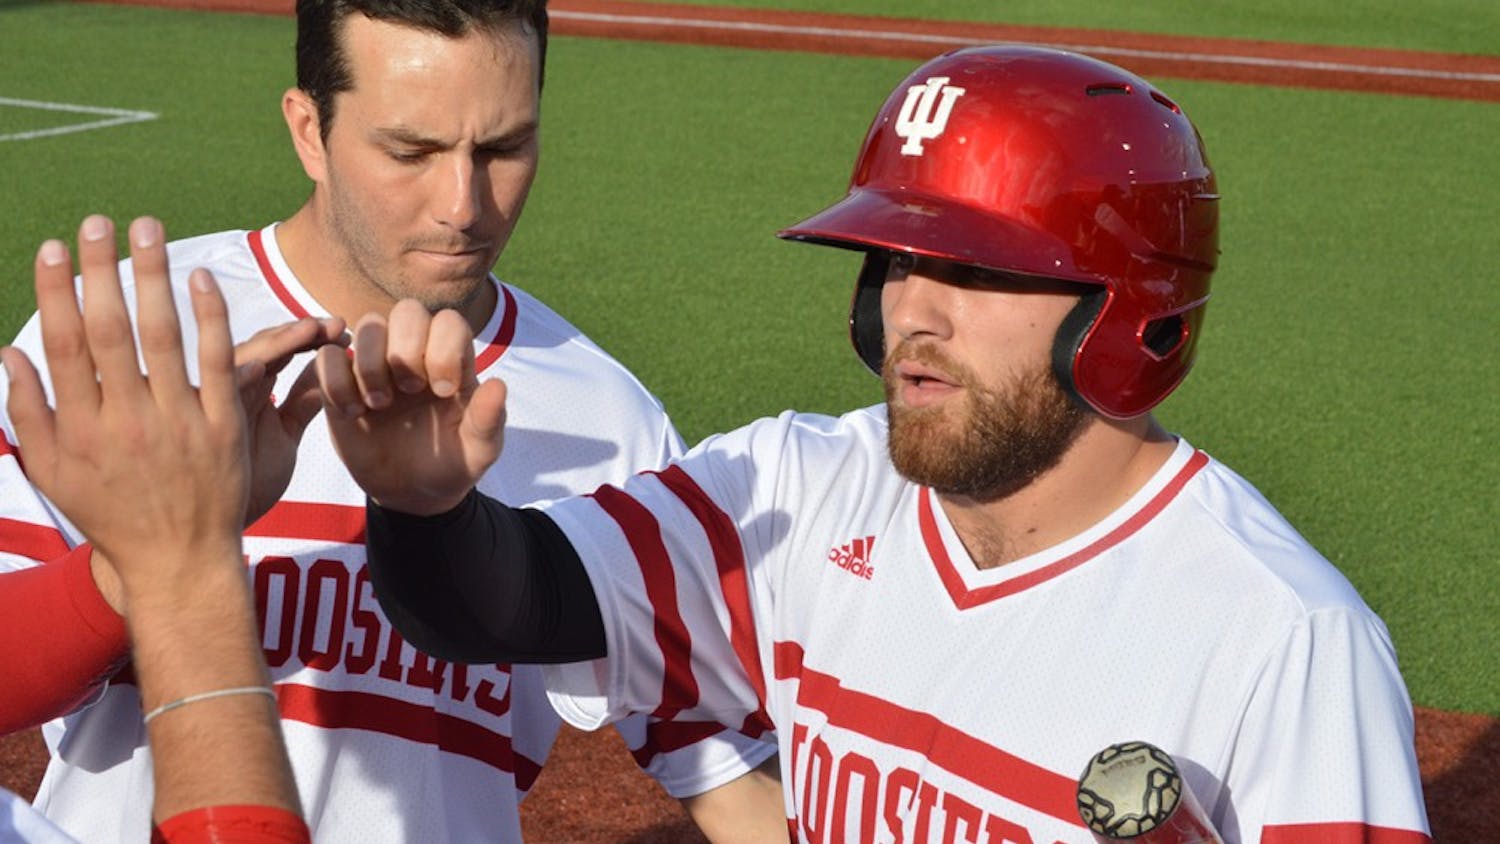 Senior Alex Krupa high-fives his teammates after scoring the first run for the Hoosiers on Tuesday. In IU's game against Ball State, IU&nbsp;finished with a 3-2 win.&nbsp;